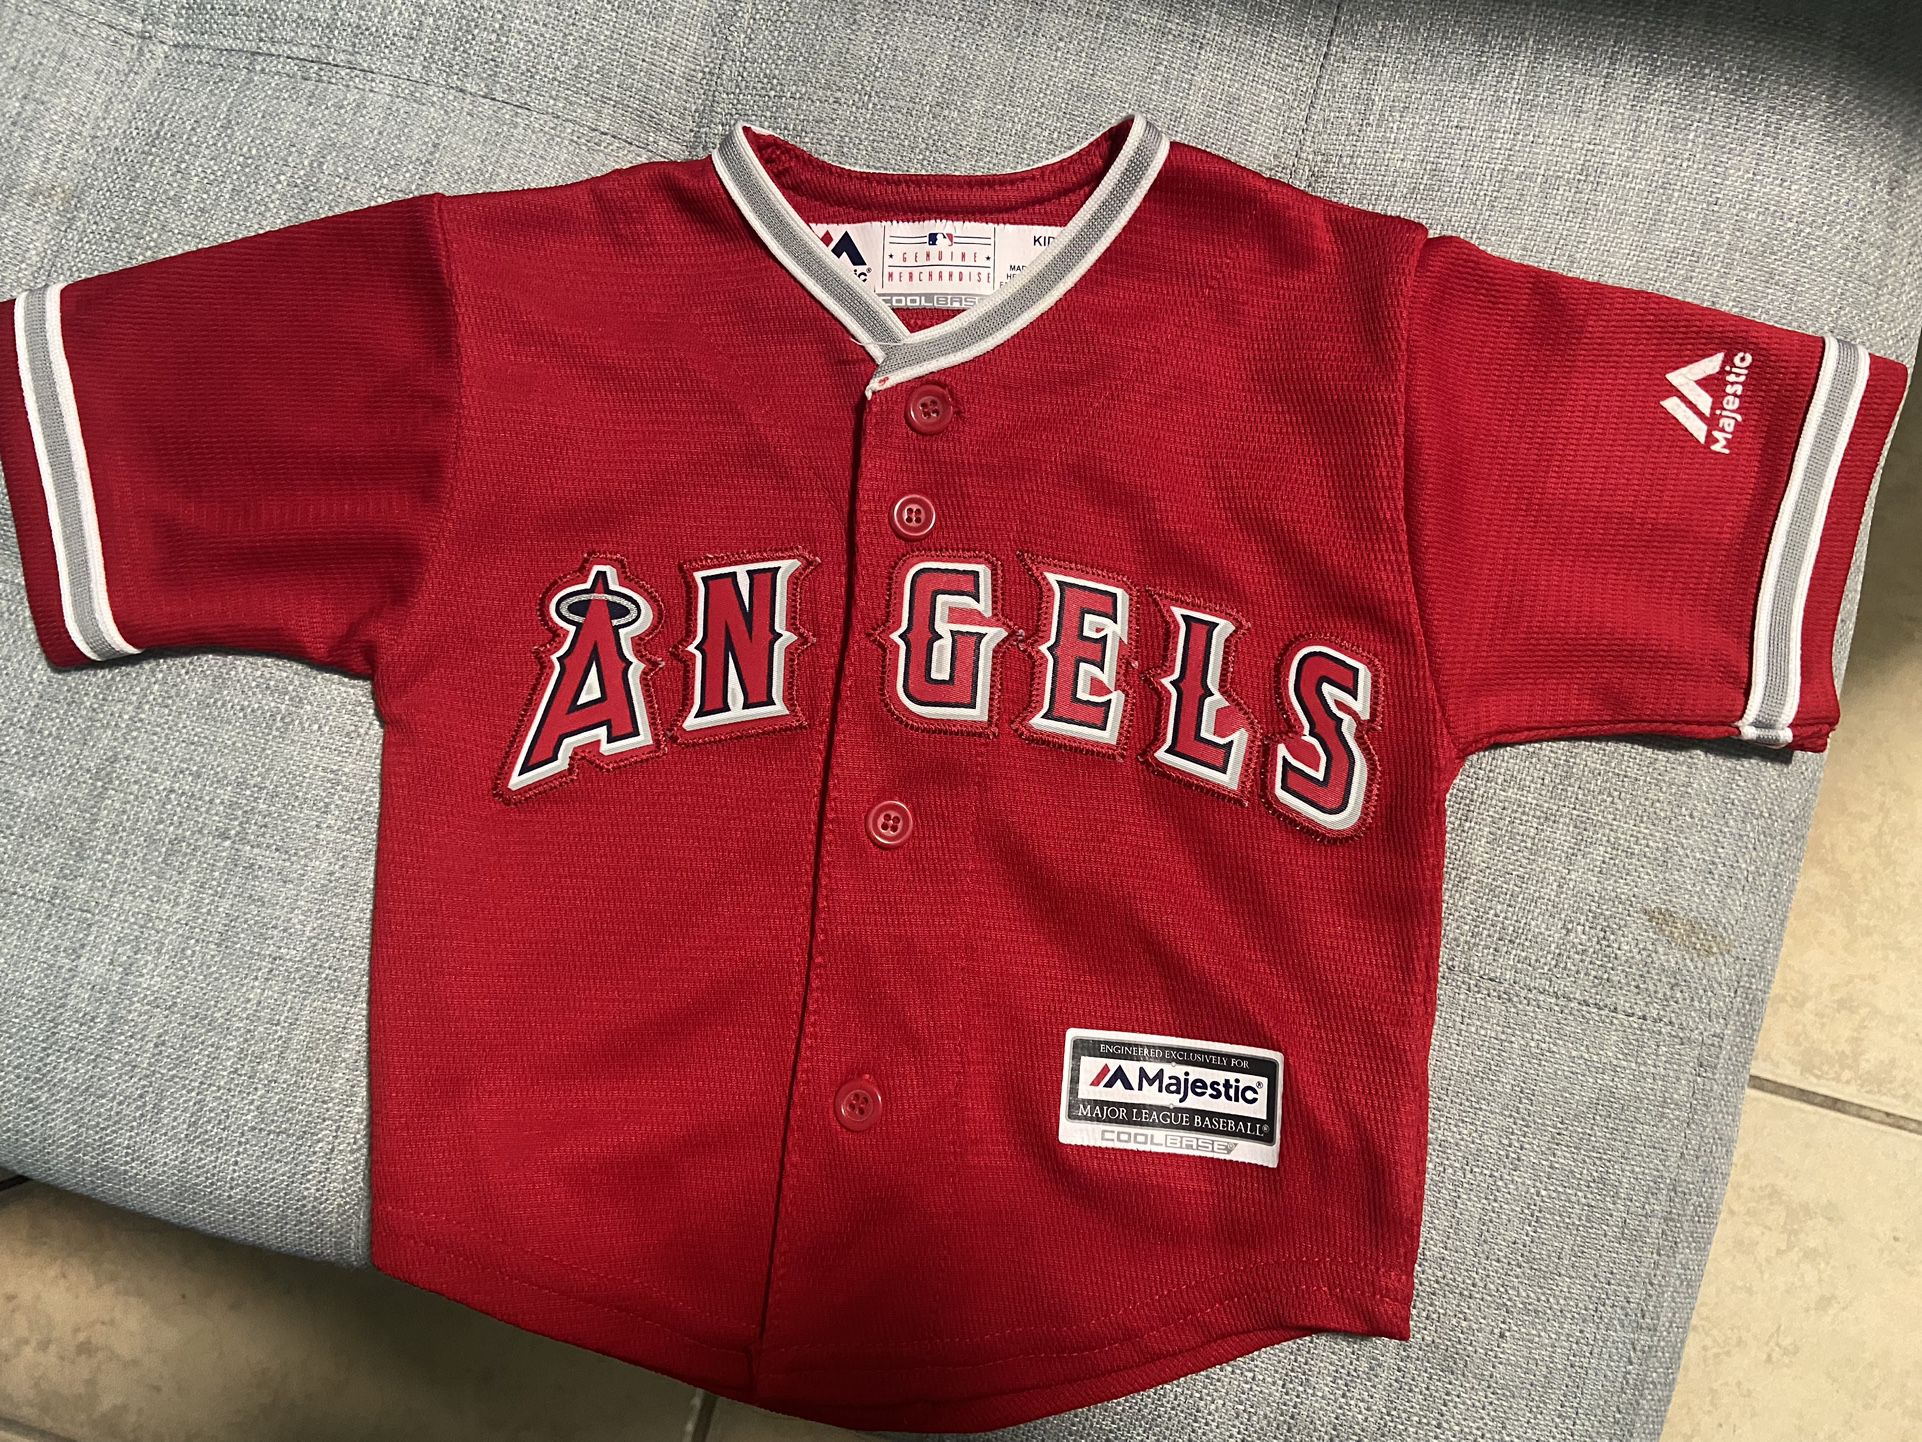 Majestic MLB Anaheim Angels Mike Trout Red Toddler Jersey 12M for Sale in  Santa Ana, CA - OfferUp